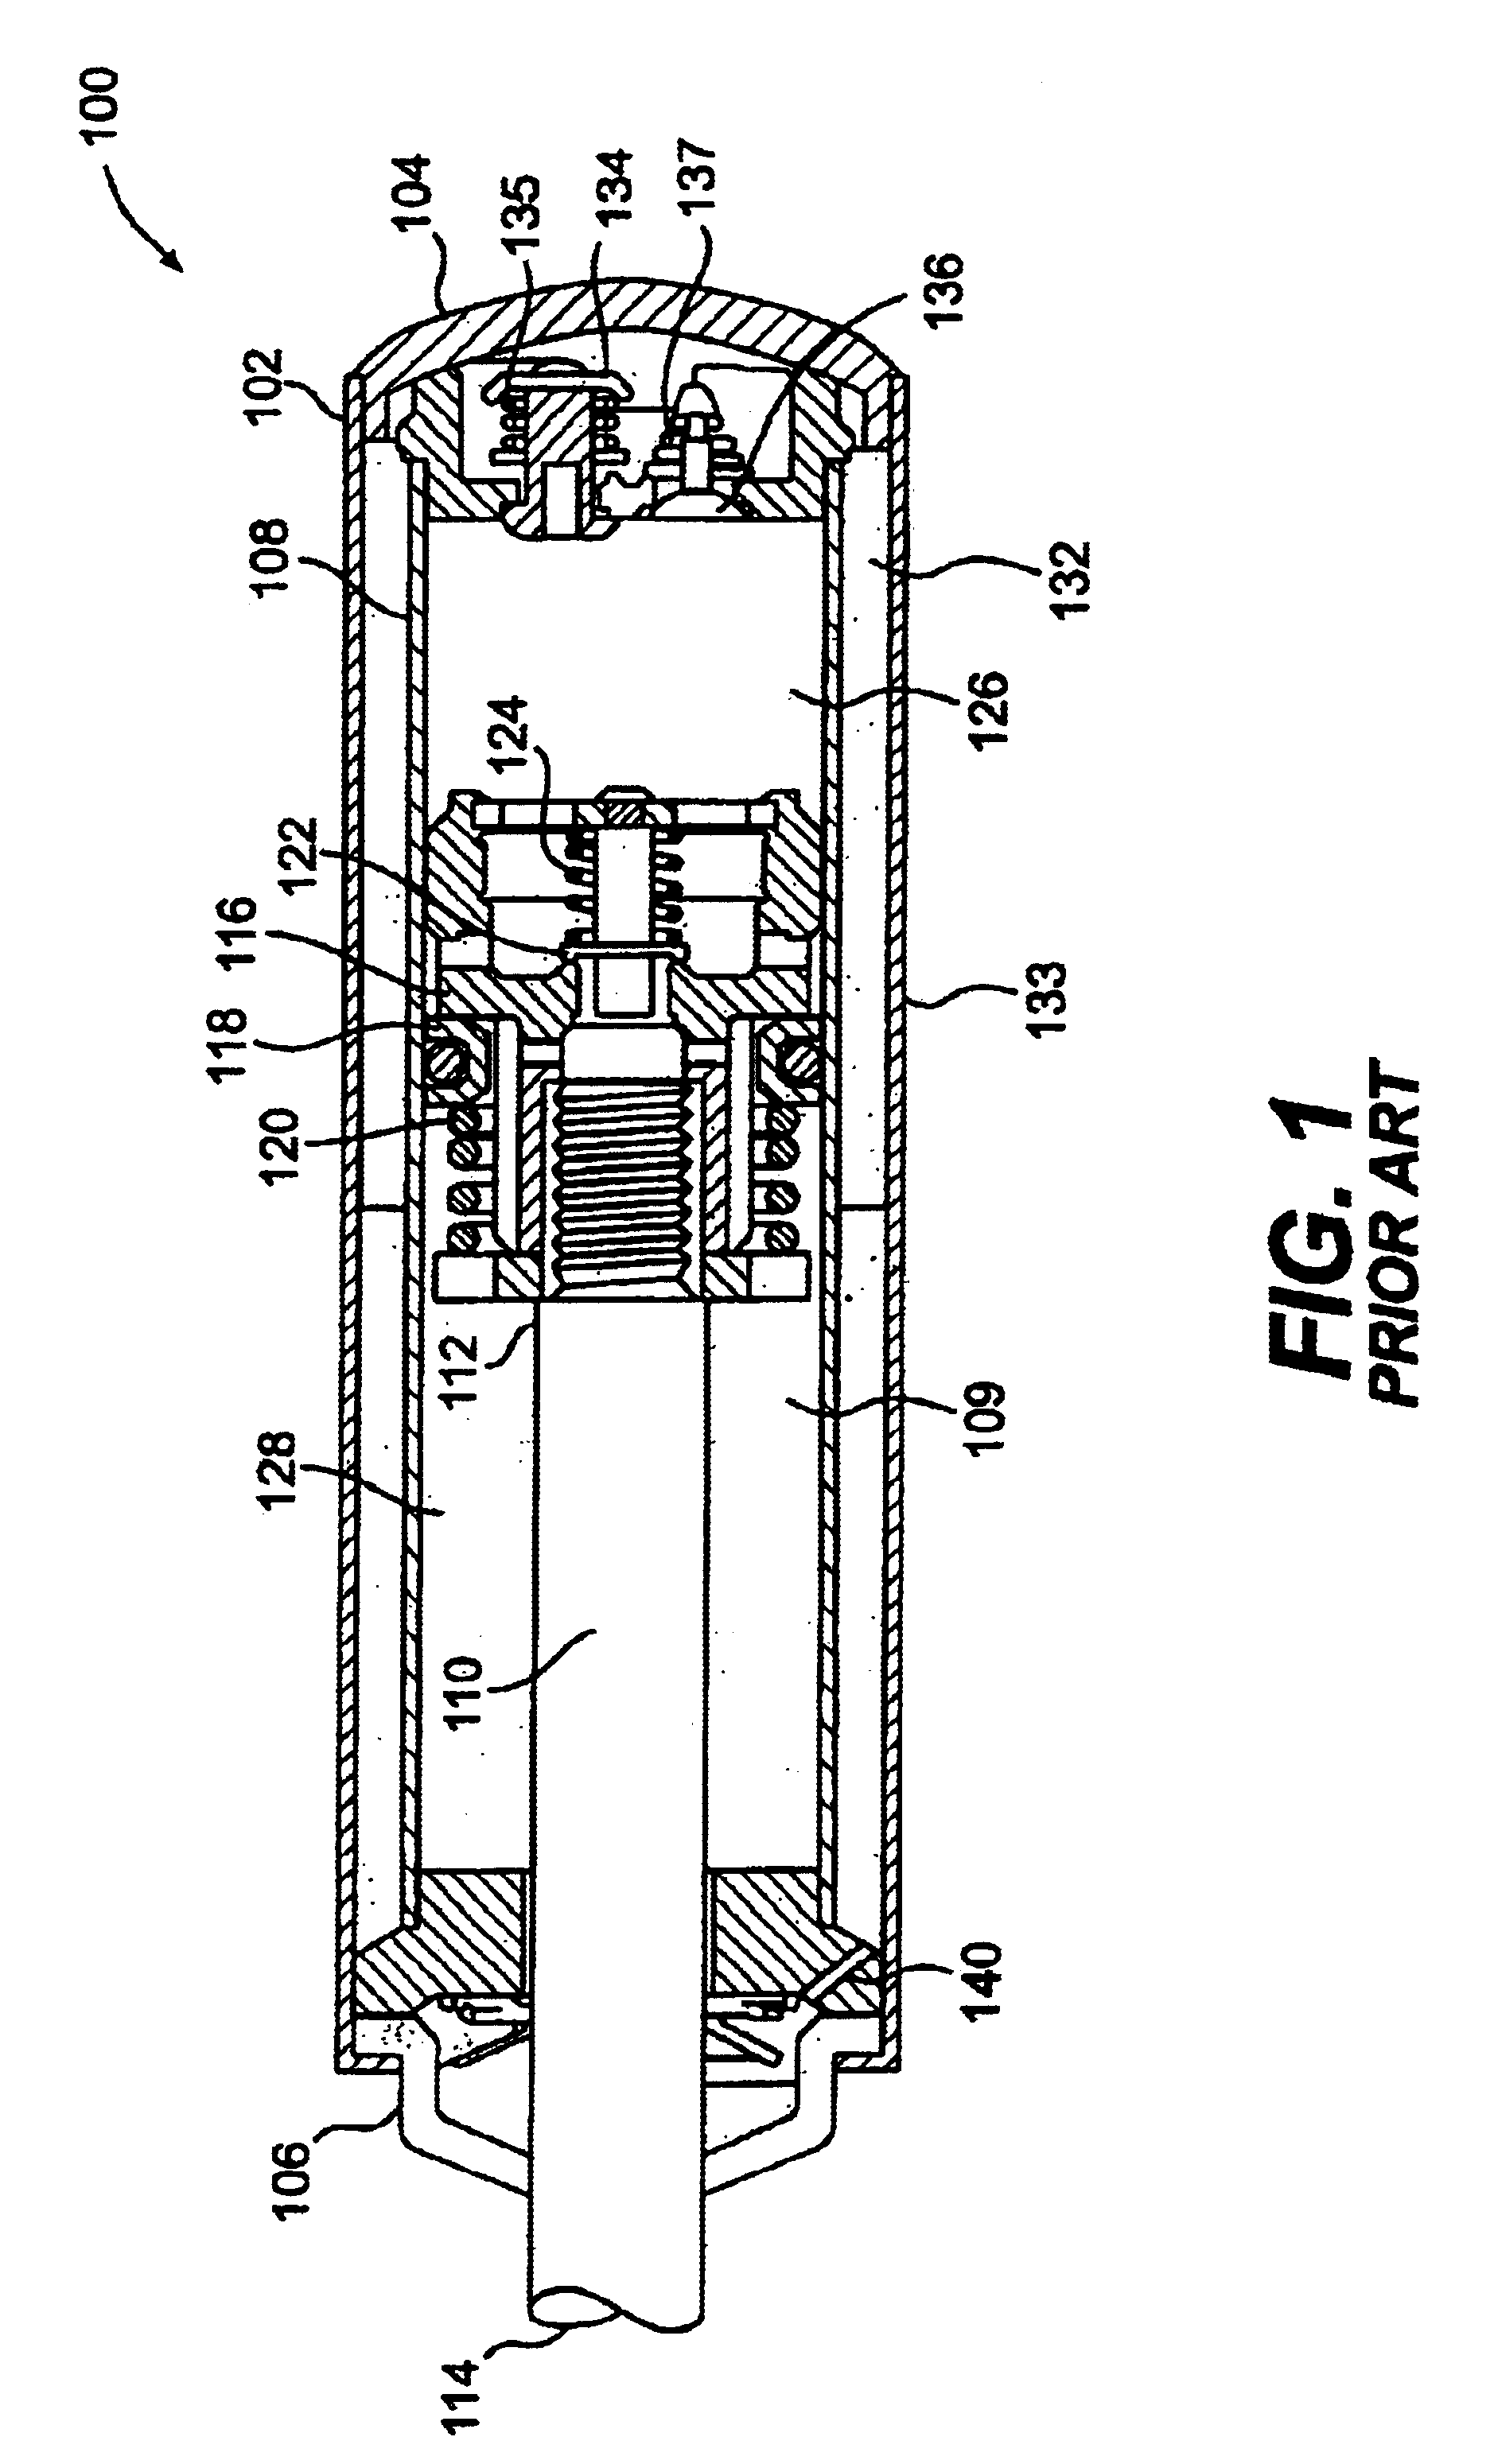 Shock absorber with adjustable valving